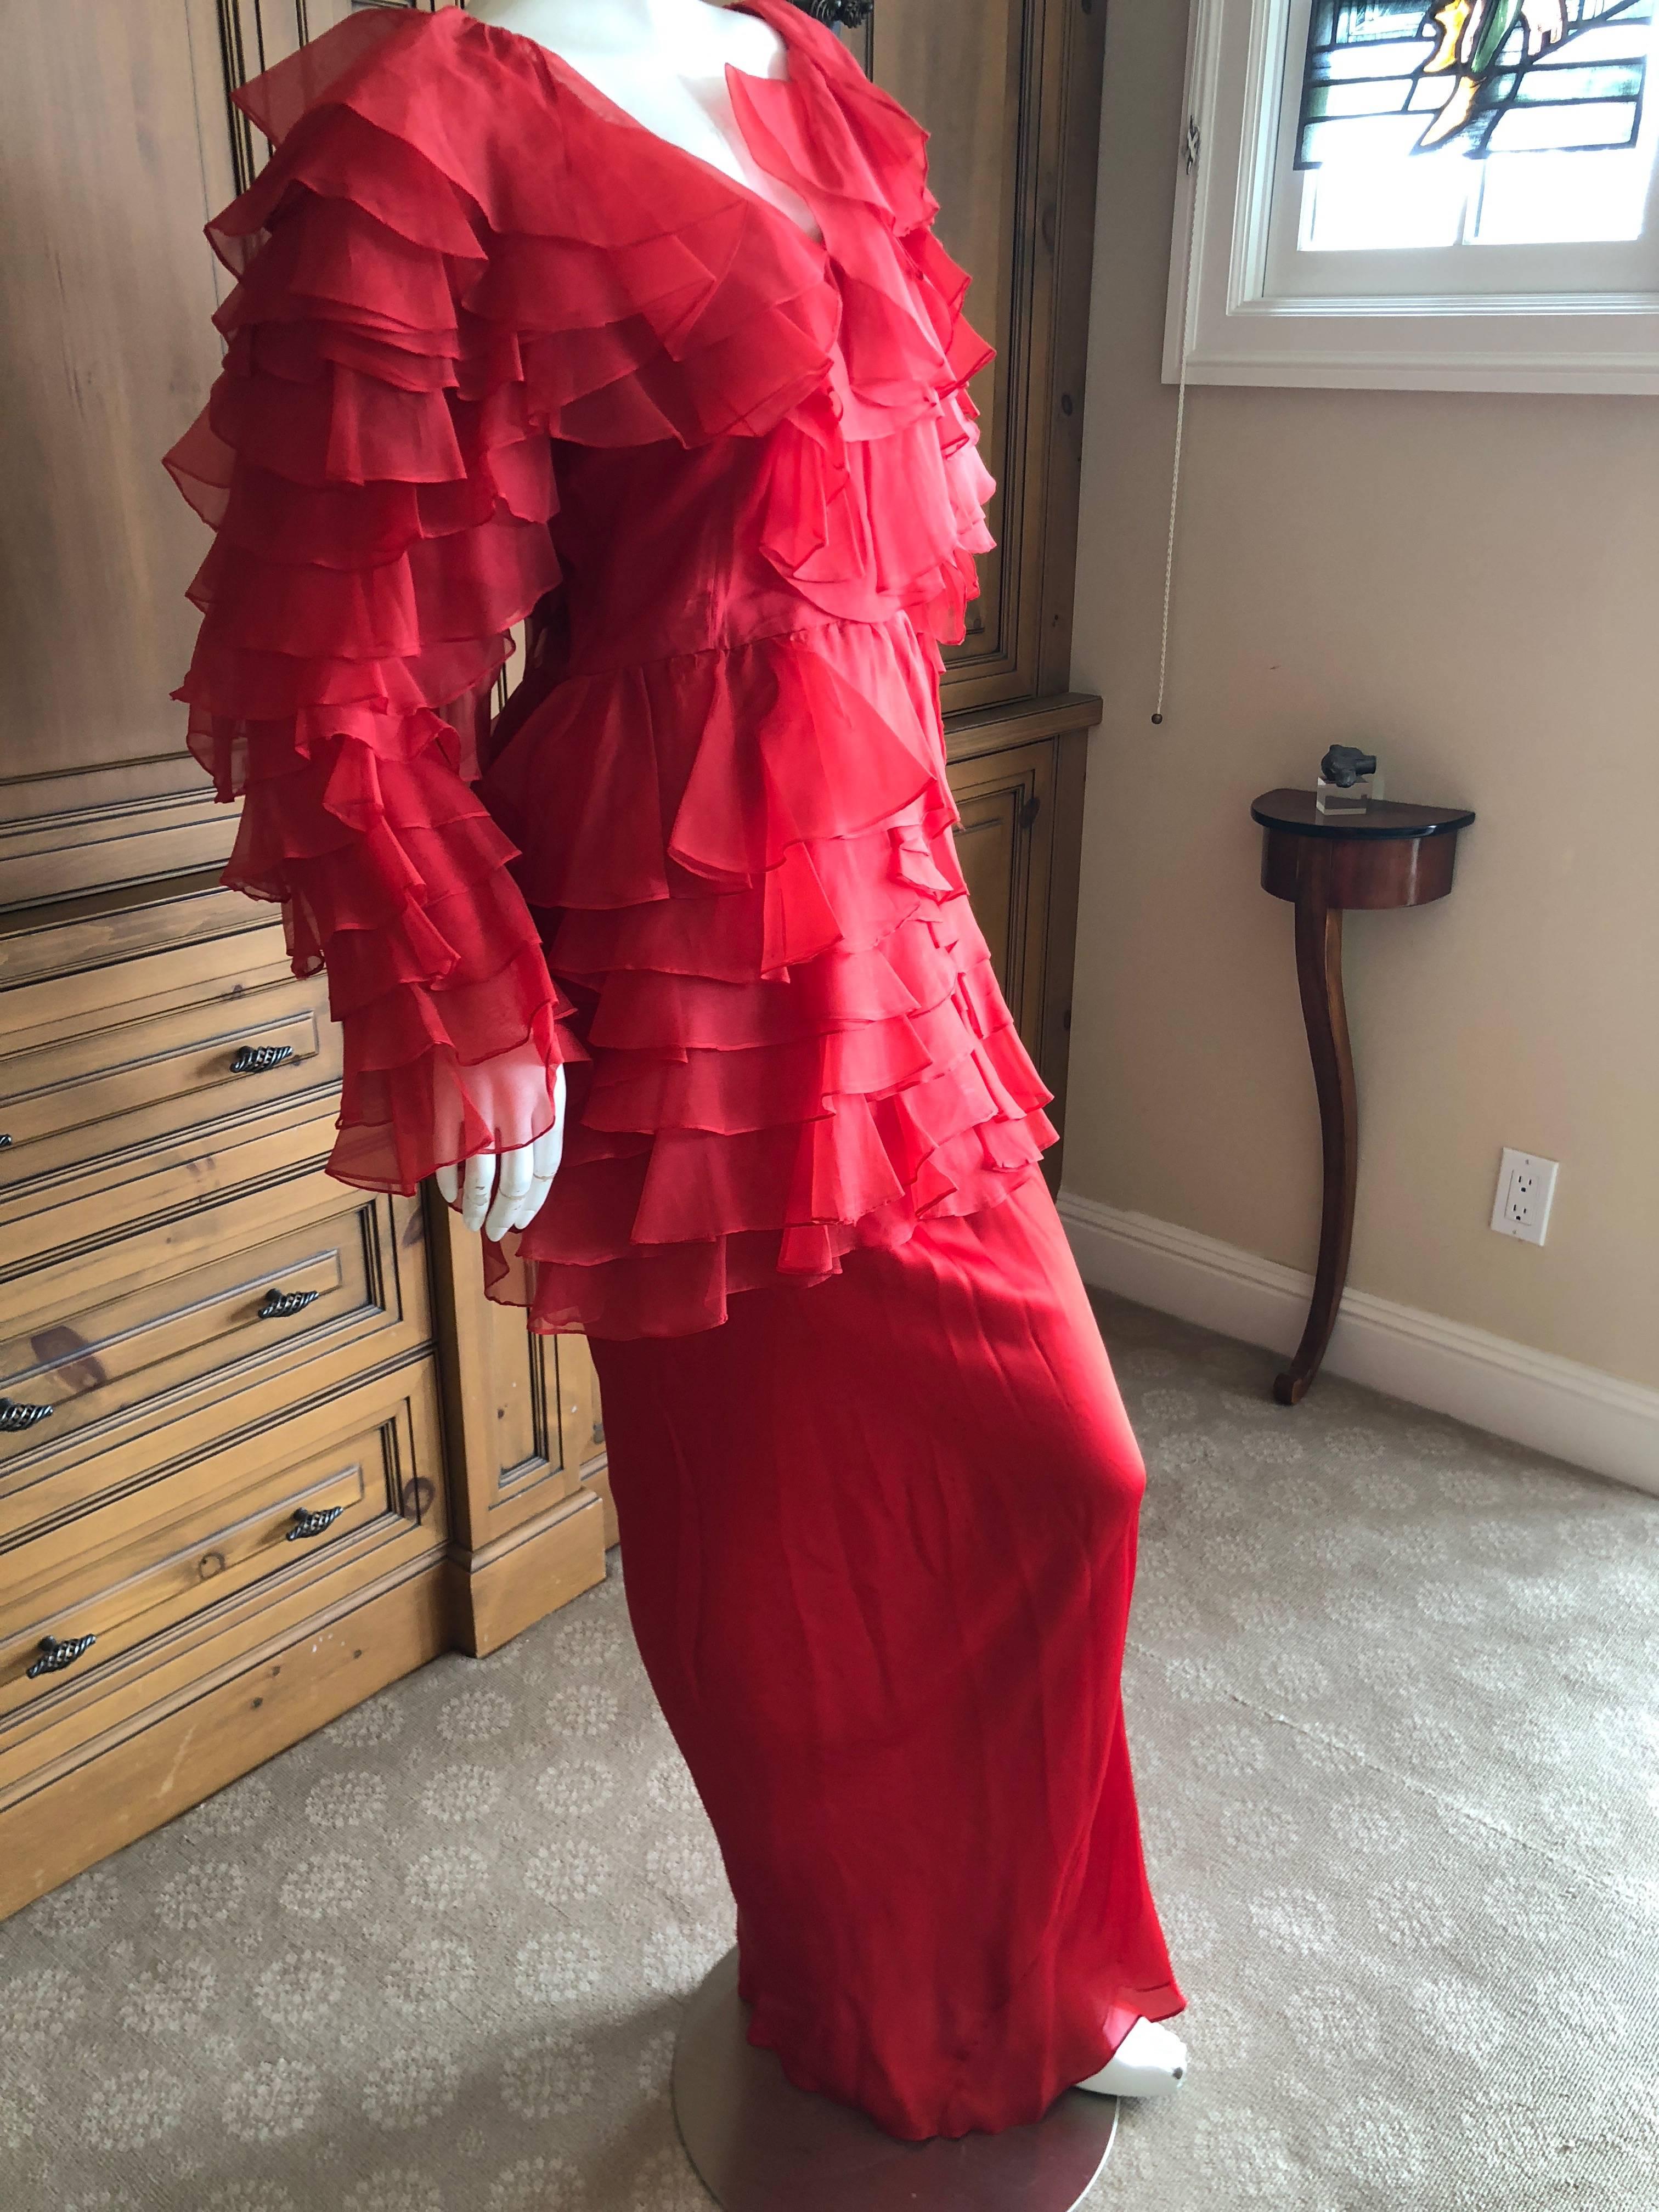 Cardinali 1970s Scarlet Red Ruffled Top and Bias Cut Silk Skirt with Fascinator In Good Condition For Sale In Cloverdale, CA